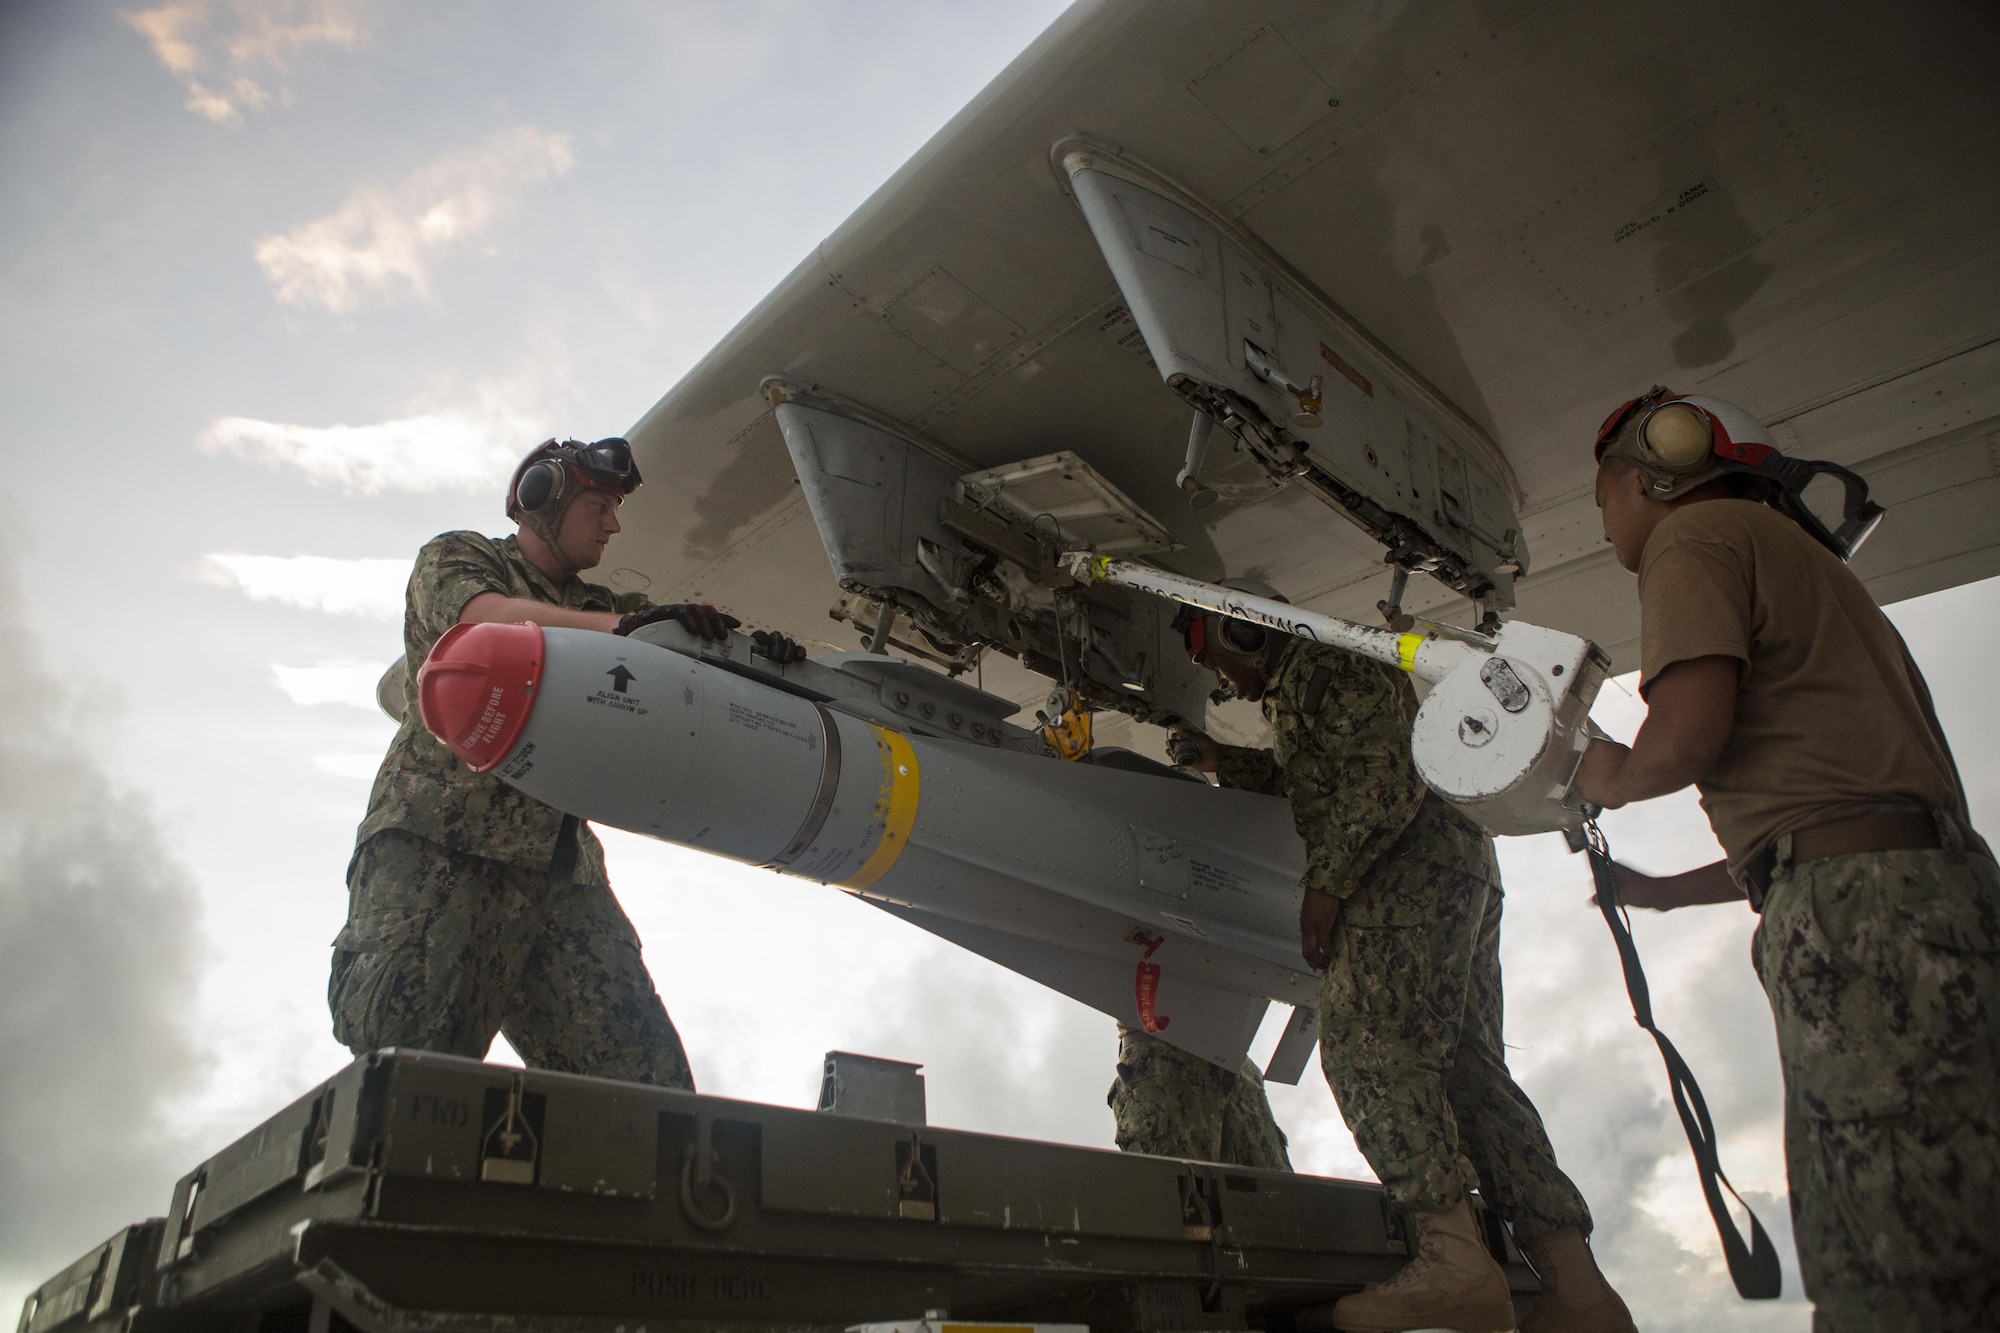 U.S. Navy sailors of Patrol Squadron 46 load a P-3 Orion aircraft with AGM-65F MAVERICKS Air to Surface Missiles prior to a sinking exercise Sept. 13, 2016, at Andersen Air Force Base, Guam, during Valiant Shield 2016. SINKEX provided service members the opportunity to gain proficiency in tactics, targeting, and live firing against a surface target at sea. Valiant Shield is a biennial, U.S. -only field-training exercise with a focus on integration of joint training among U.S. forces. (U.S. Marine Corps photo by Sgt. Justin Fisher)